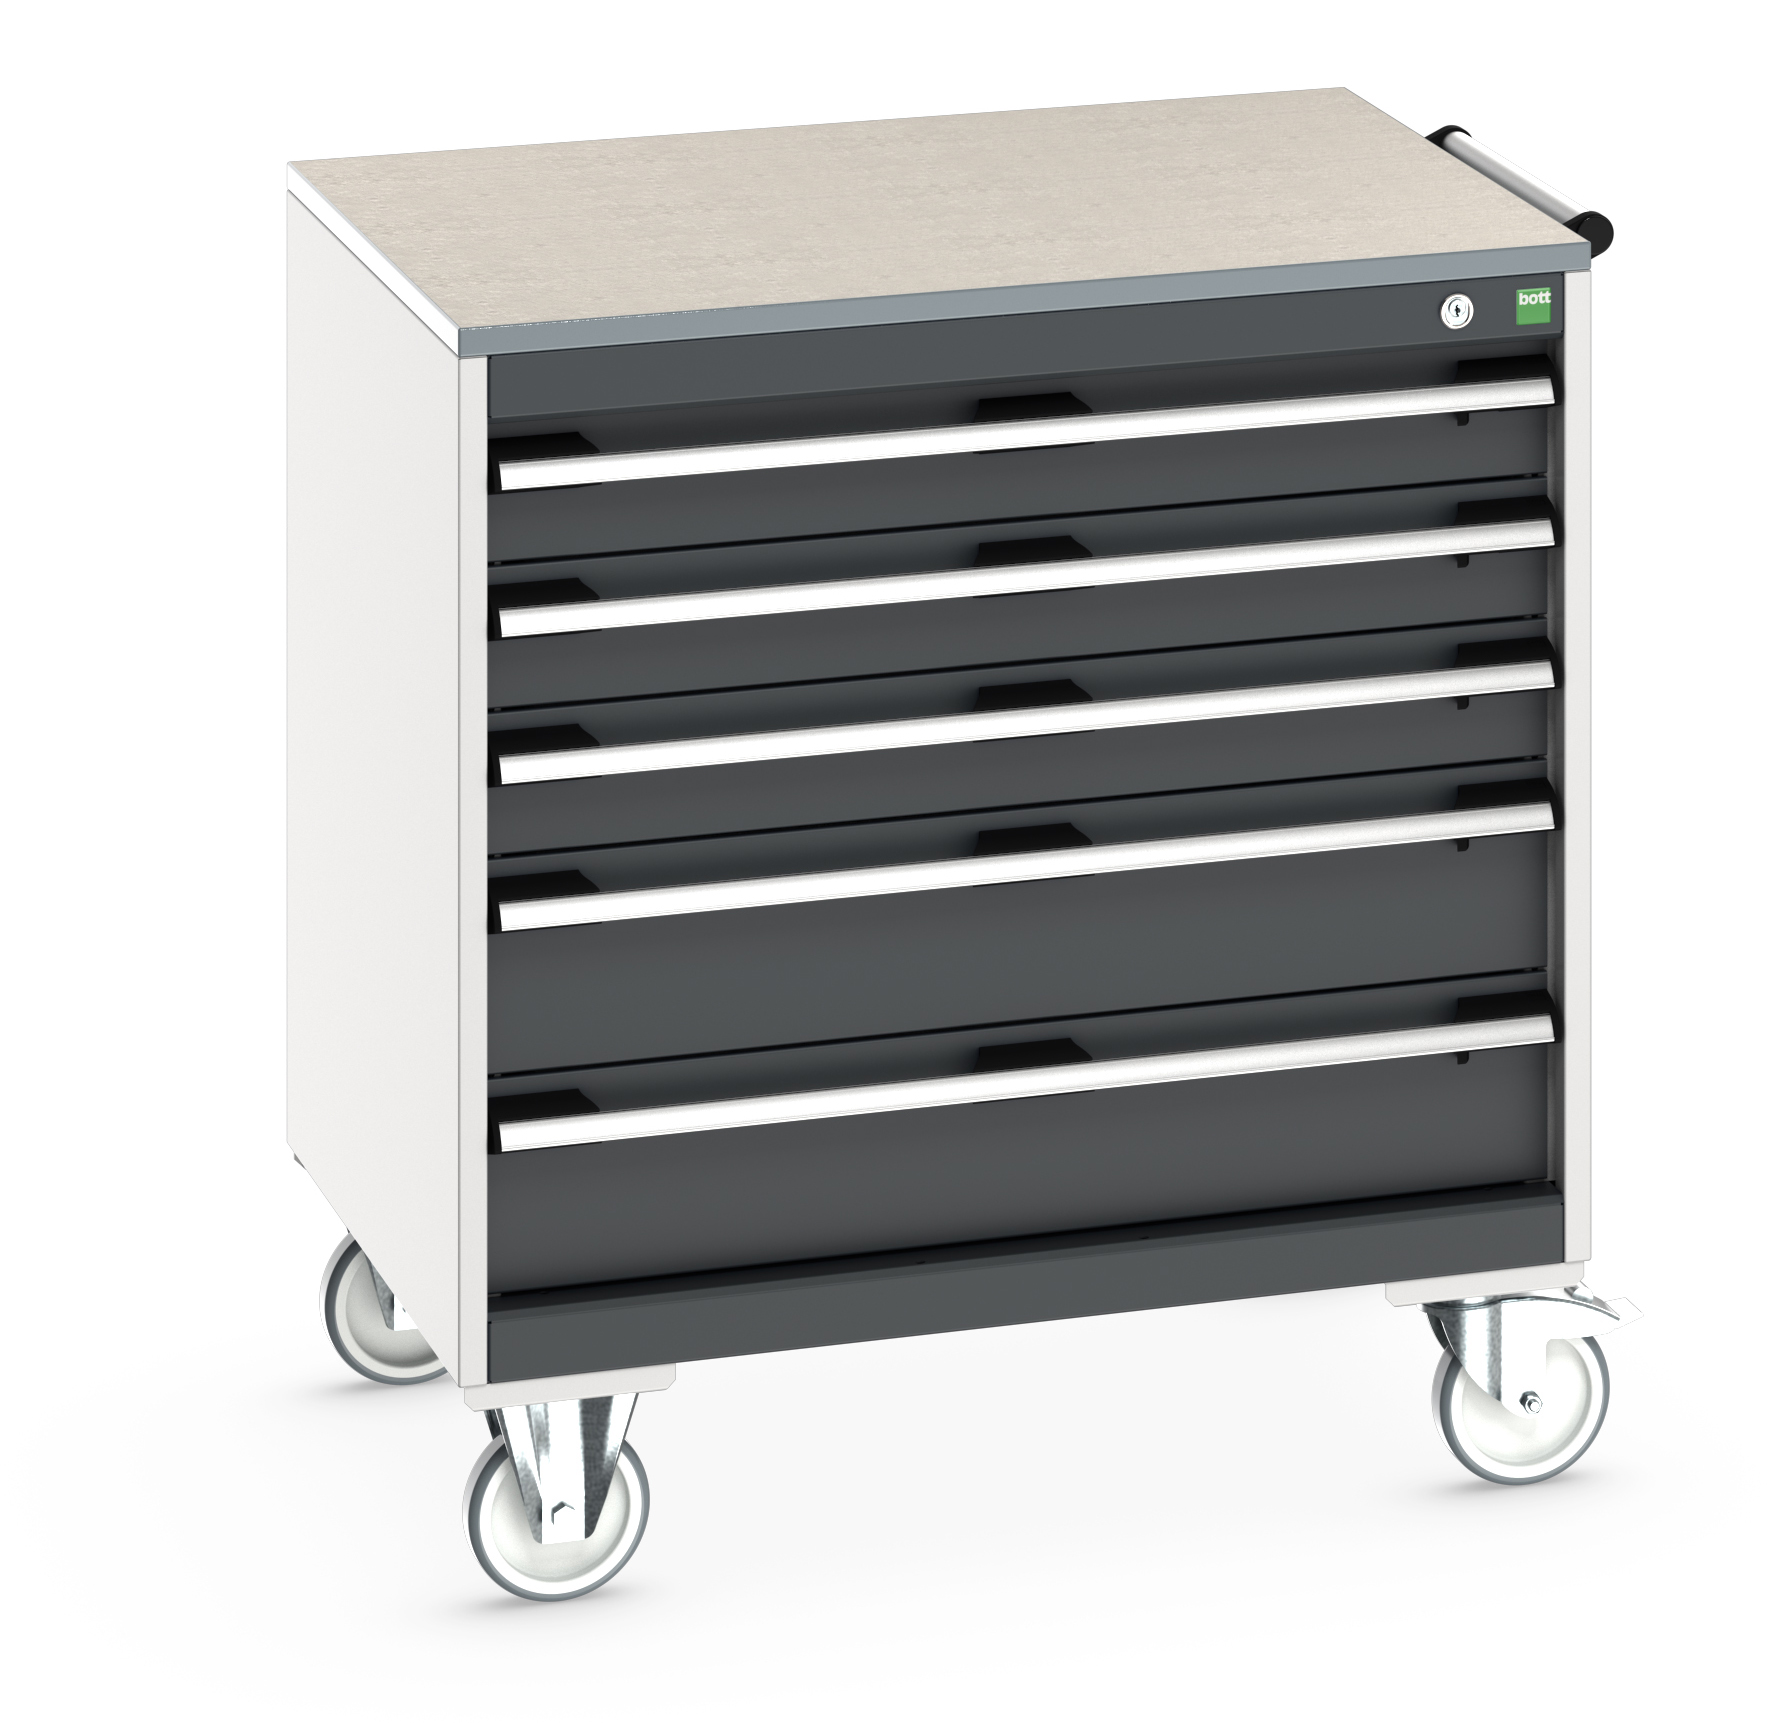 Bott Cubio Mobile Drawer Cabinet With 5 Drawers & Lino Worktop - 40402156.19V